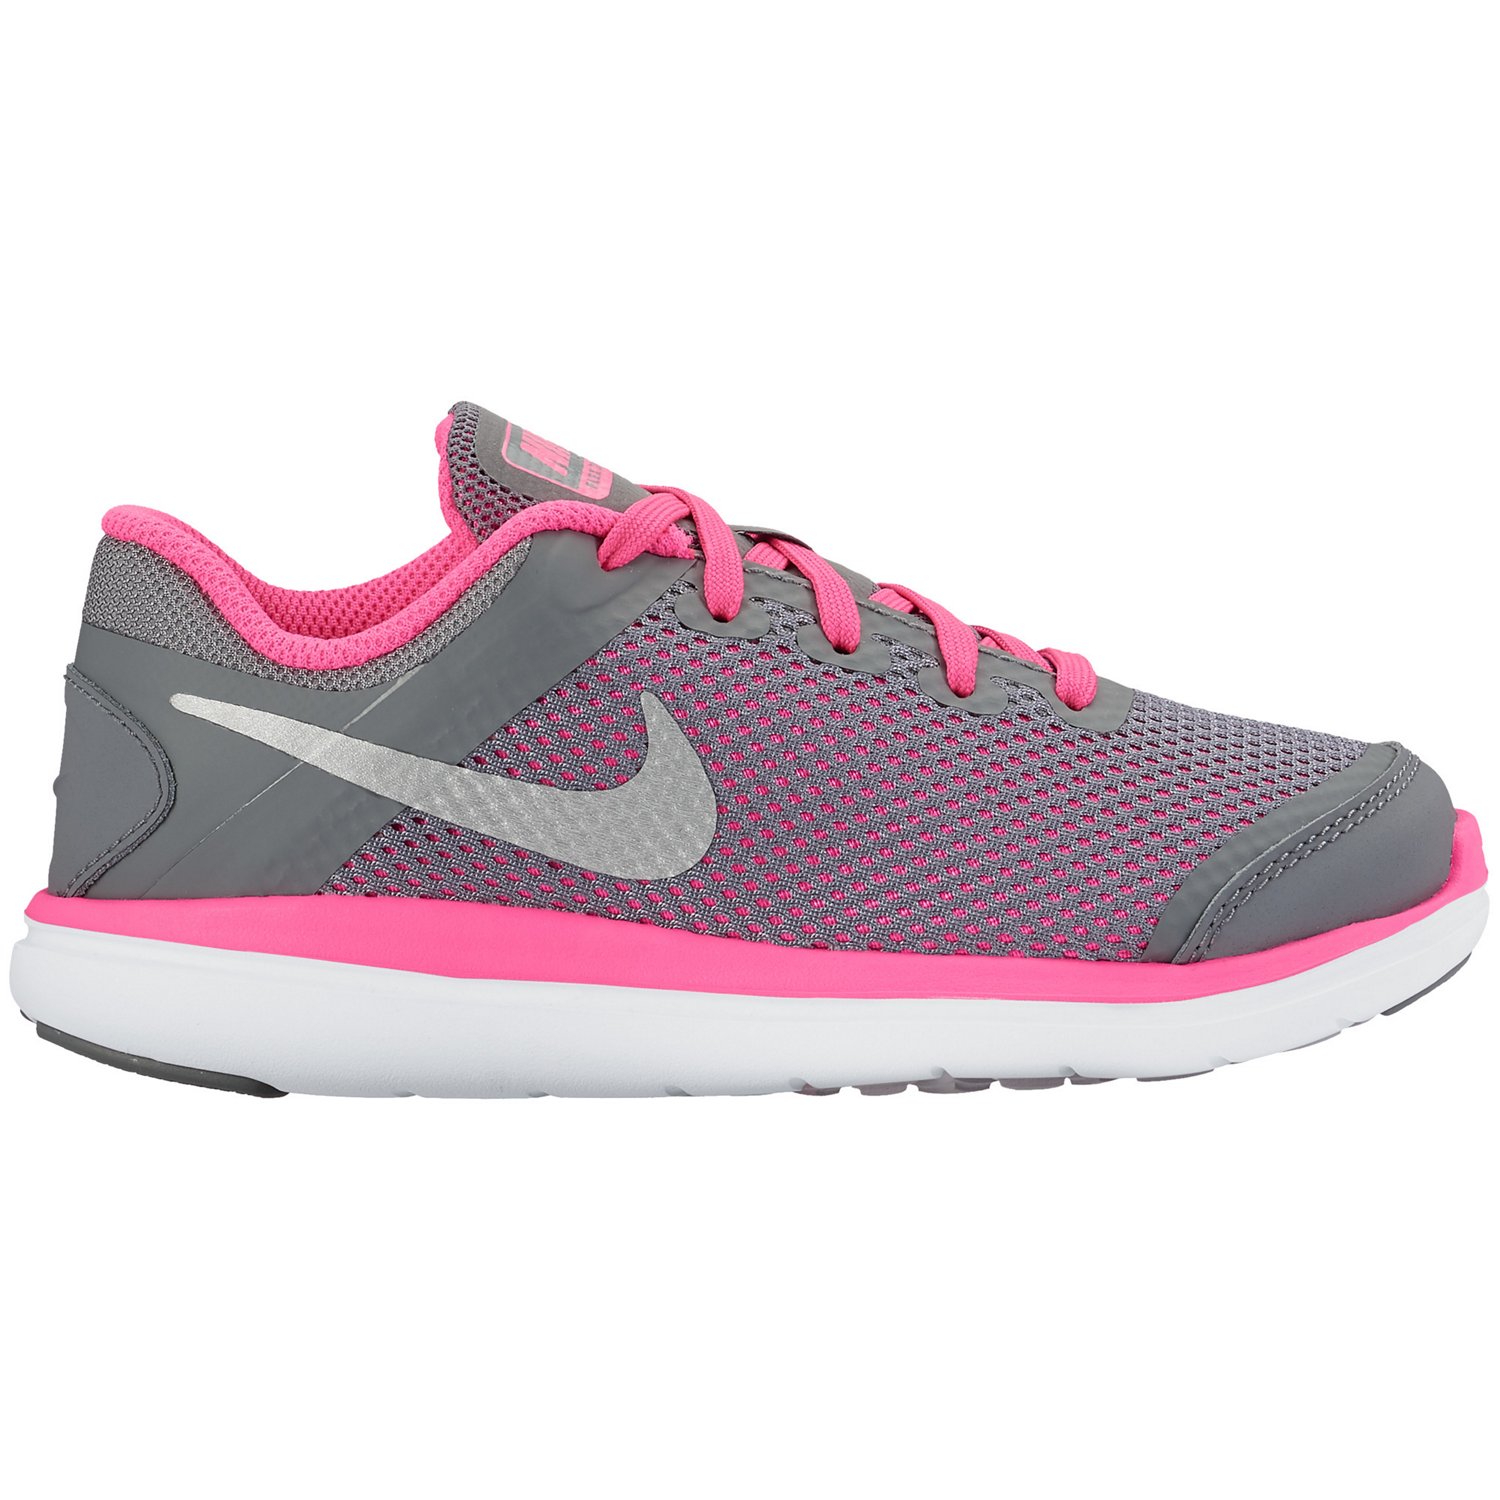 Girls' Running Shoes | Running Shoes For Girls, Girls' Athletic Shoes ...